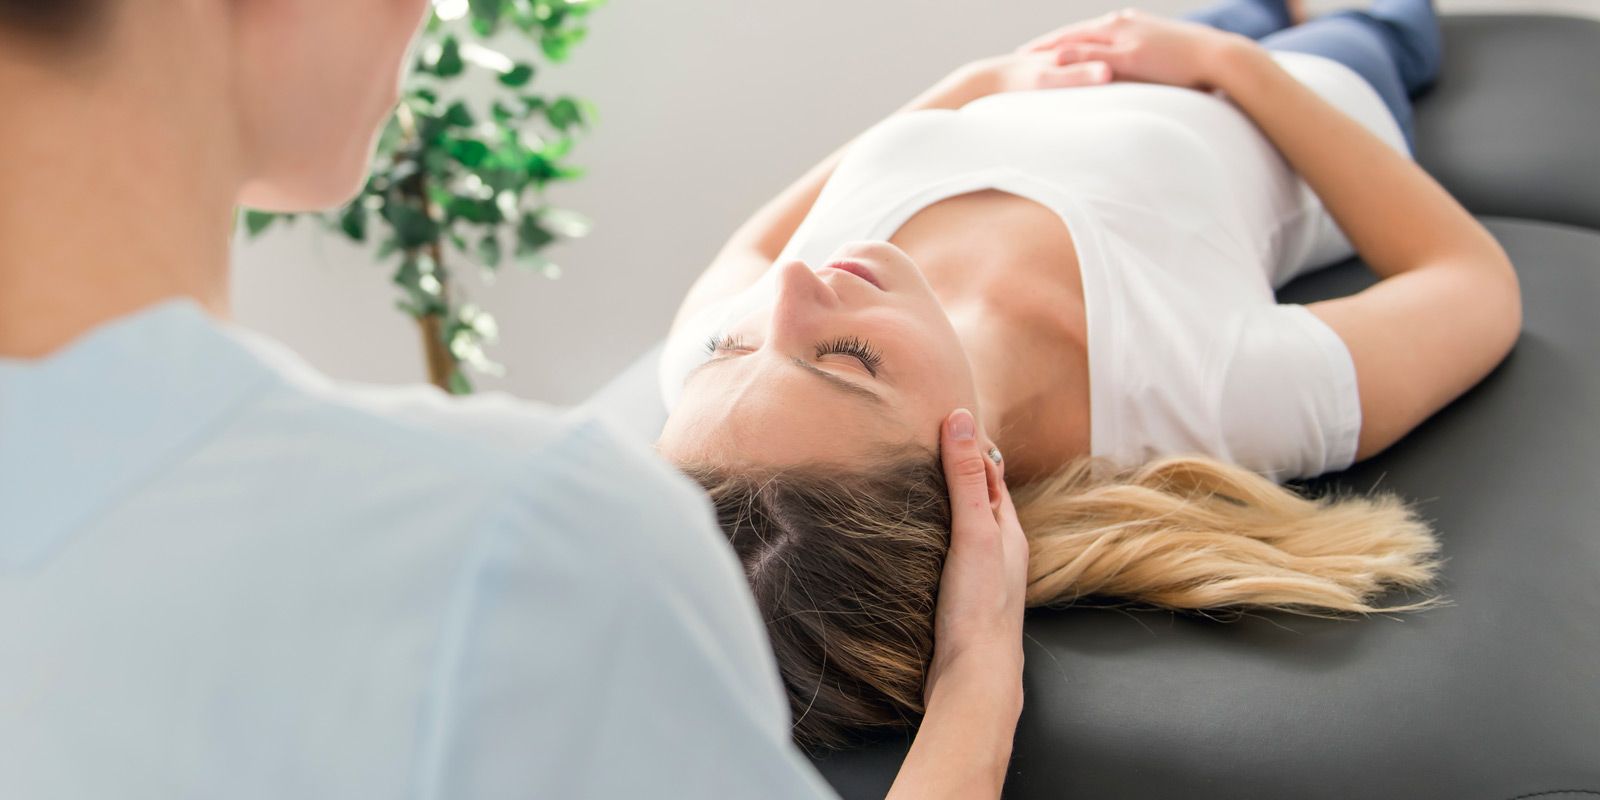 Neck Pain Relief NYC - Dr. Alicia Armitstead. Chiropractic Cervicalgia Treatments at the Healing Arts NYC Health and Wellness Center in Manhattan NY 10017